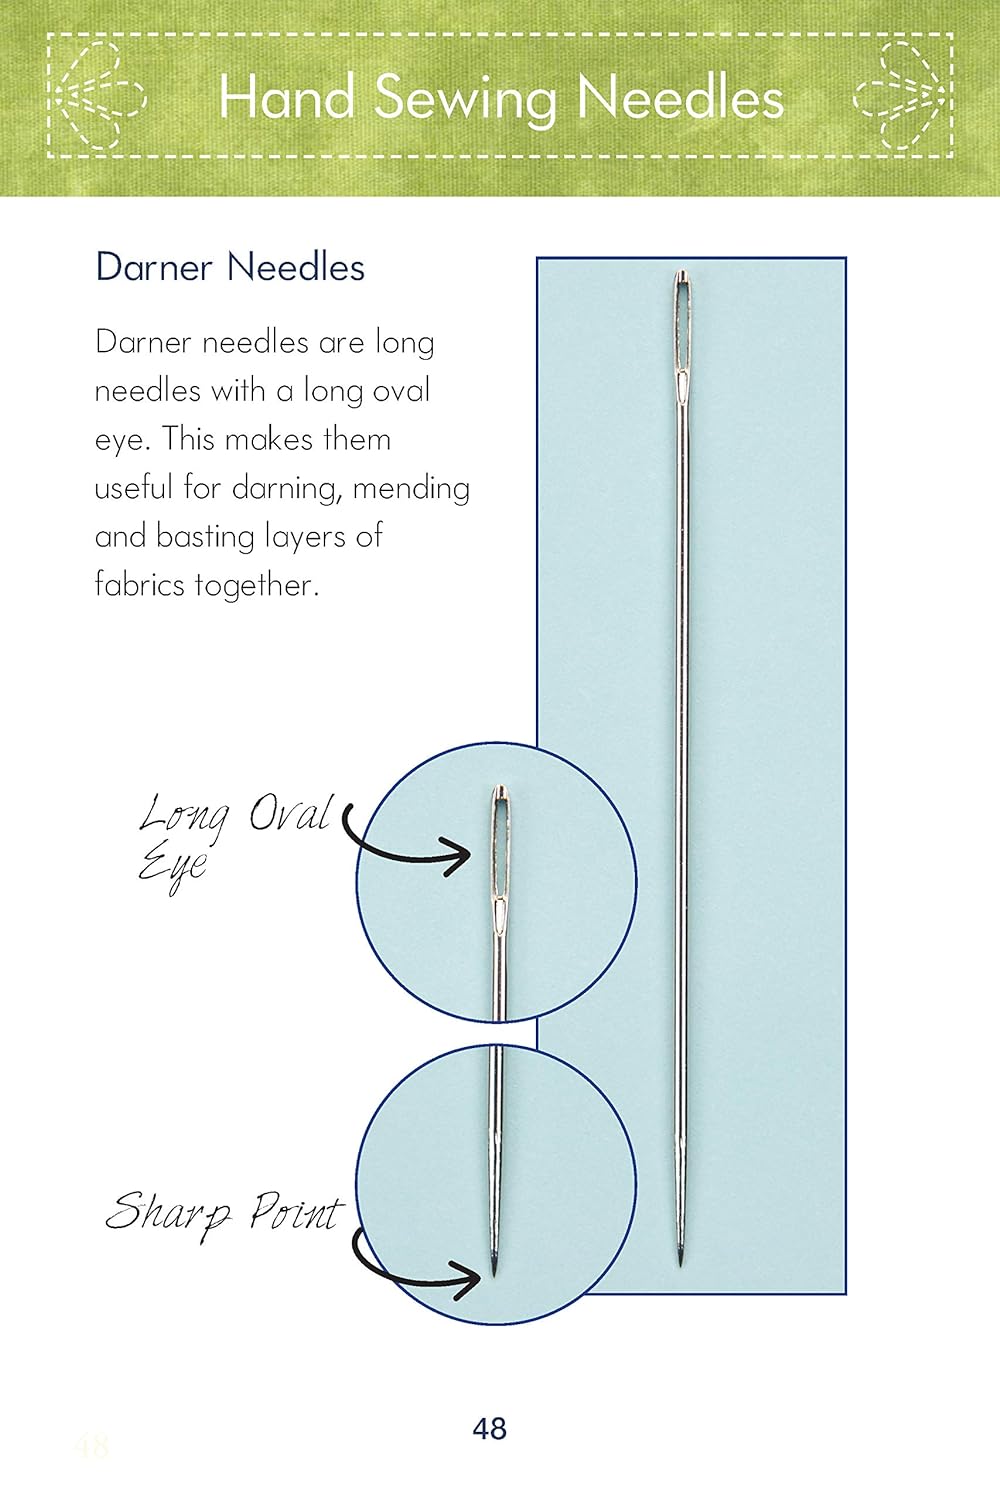 Know Your Needles Pocket Guide